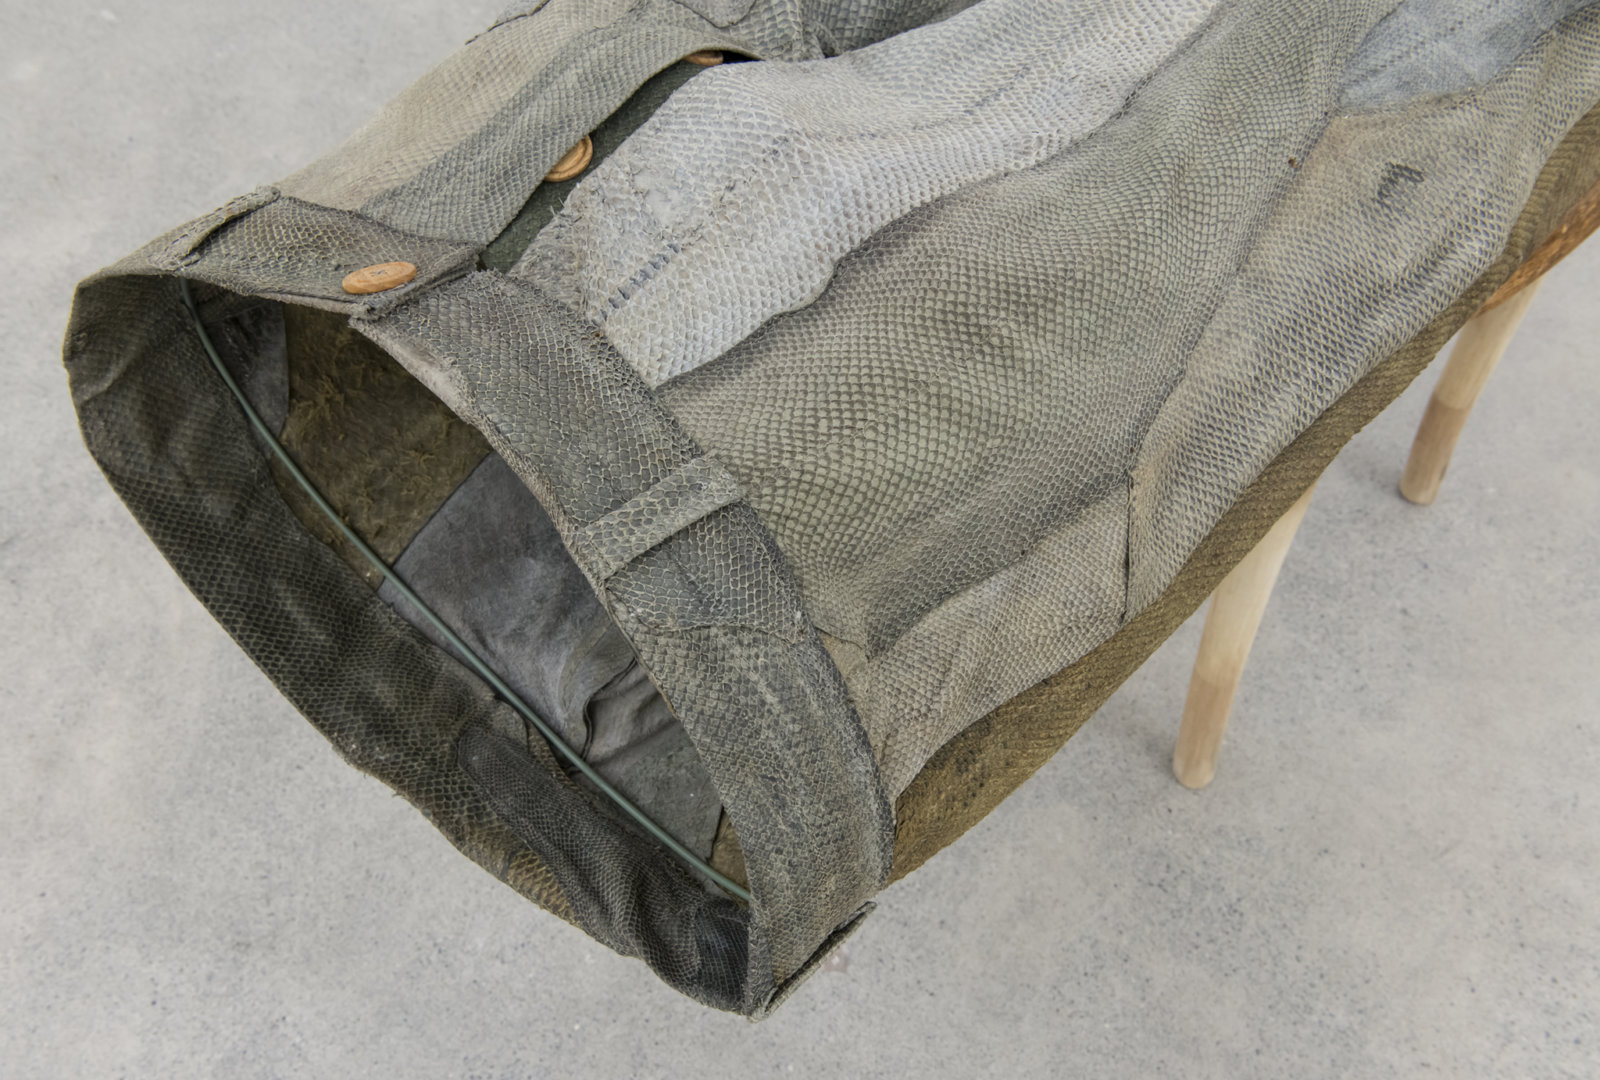 Ashes Withyman, Into the Water (In his Leather Breeches) (detail), 2008, fish leather, cotton thread, maple buttons, wooden chair, 28 x 35 x 15 in. (71 x 89 x 38 cm)